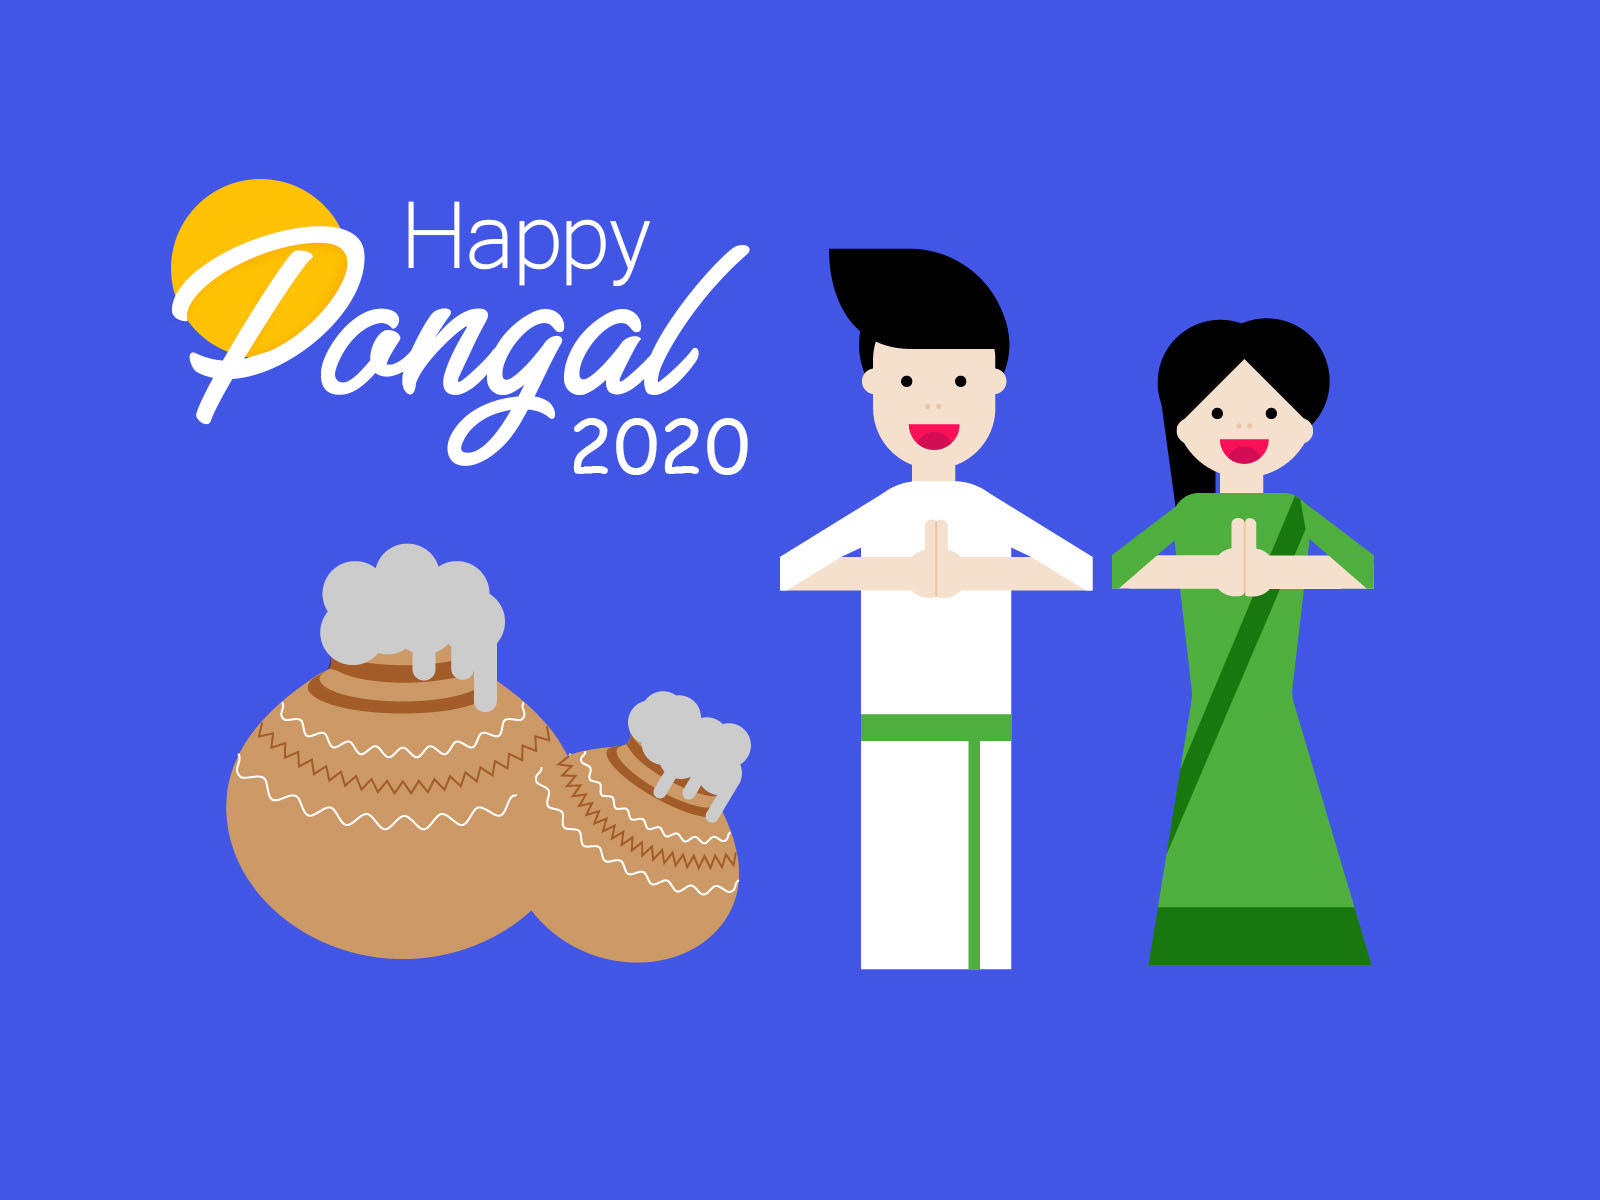 Happy Pongal Greetings Cards and wishes Images, Photos, Status and Messages  - Indiater